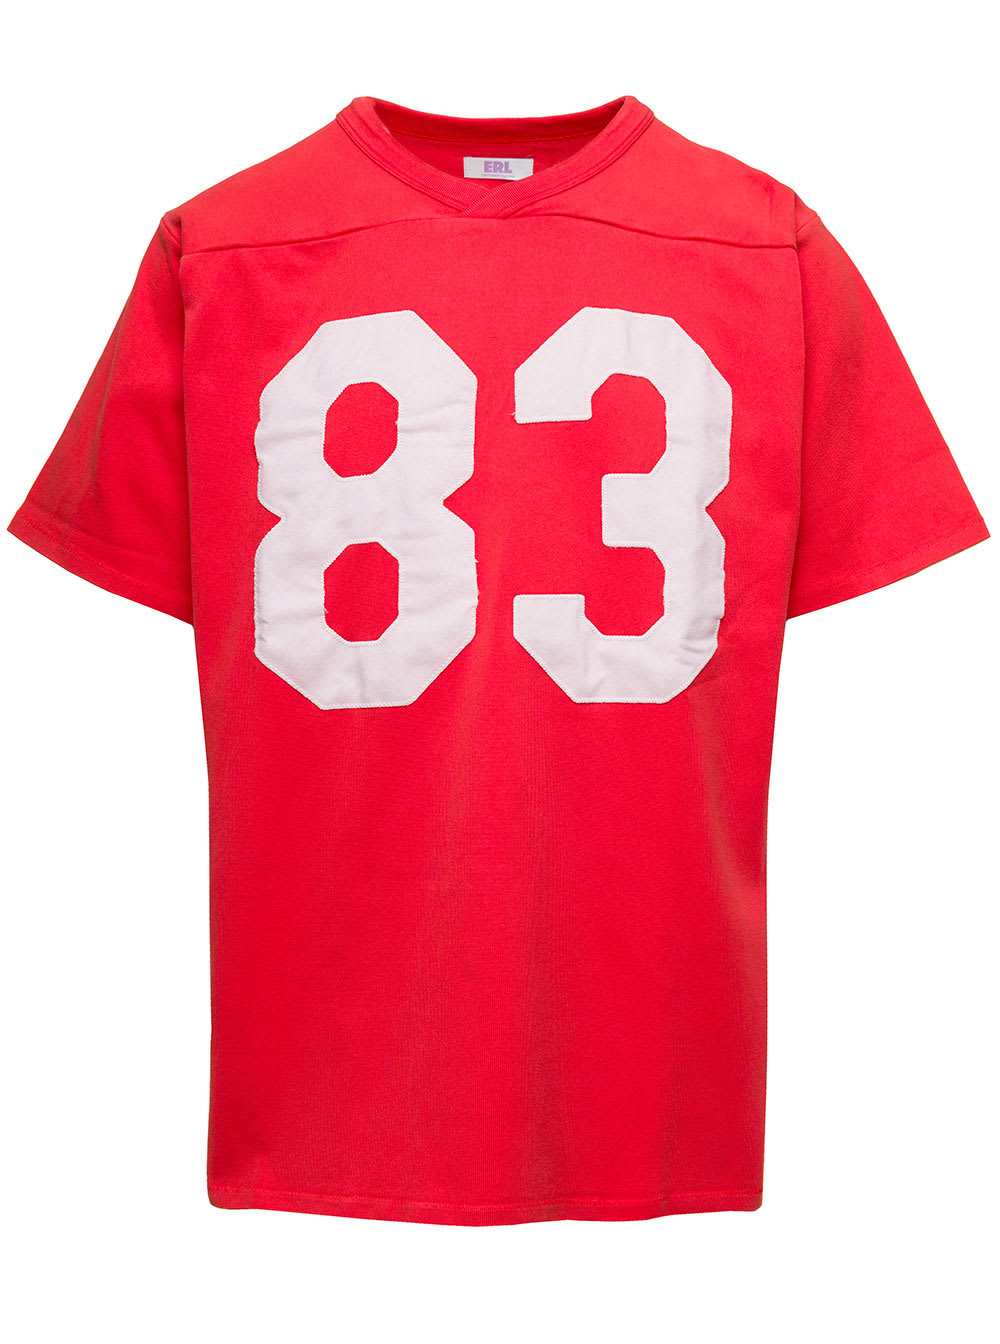 erl red football t-shirt with 83 print in cotton